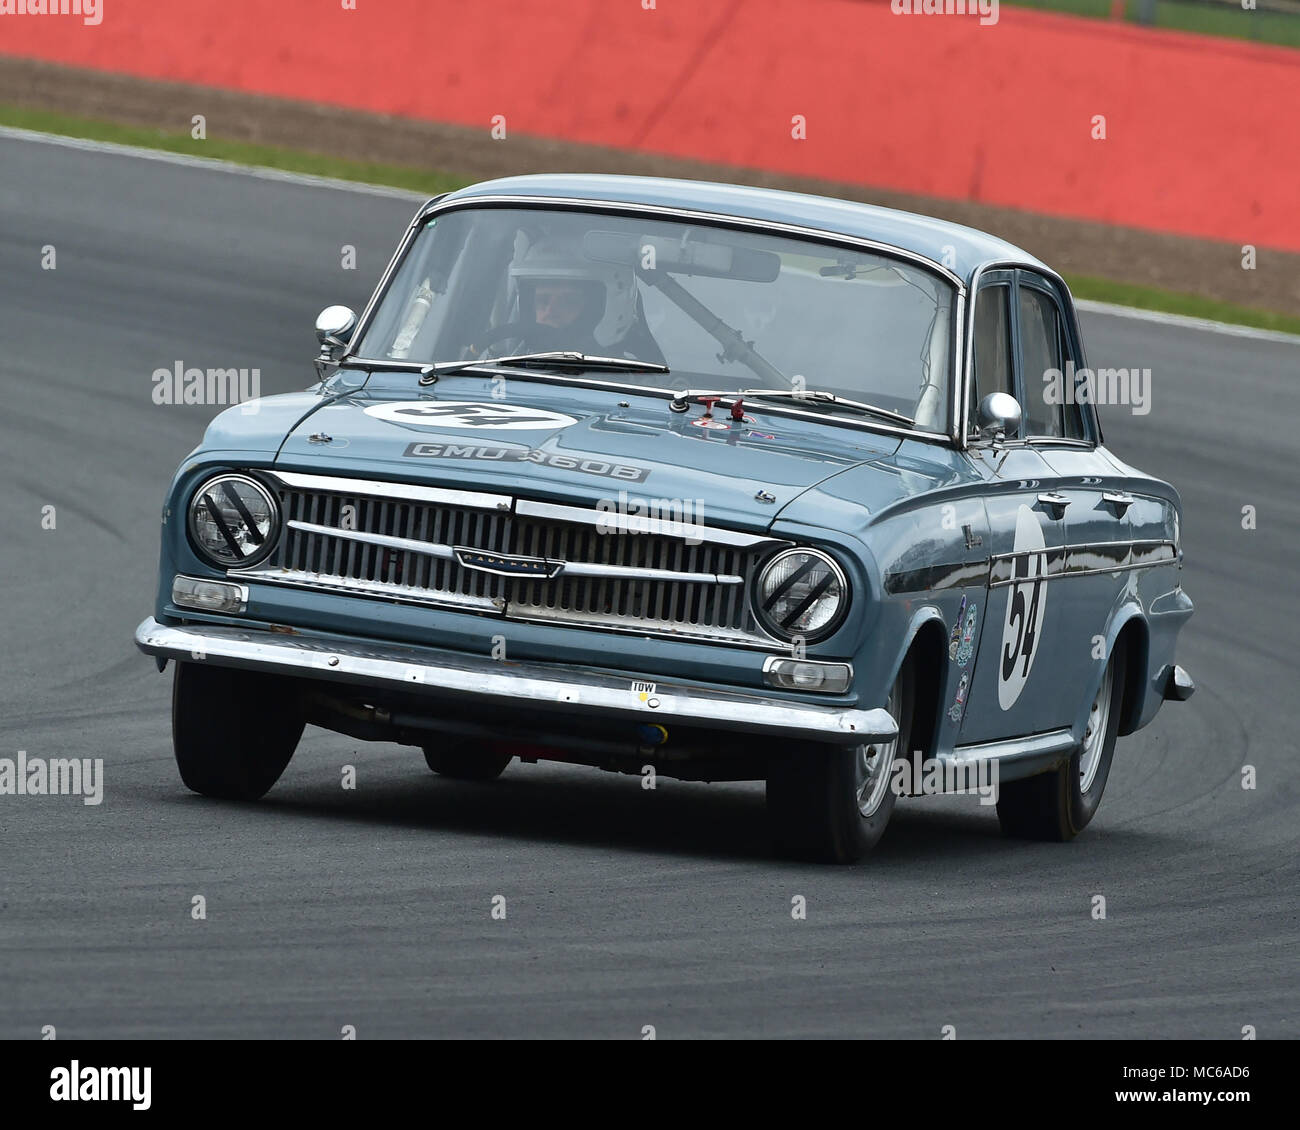 Silverstone, Towcester, Northamptonshire, England, Sunday 1st April 2018. Tony Hall, Vauxhall VX4/90, in the HRDC Coys Trophy event held on the TCR UK Stock Photo